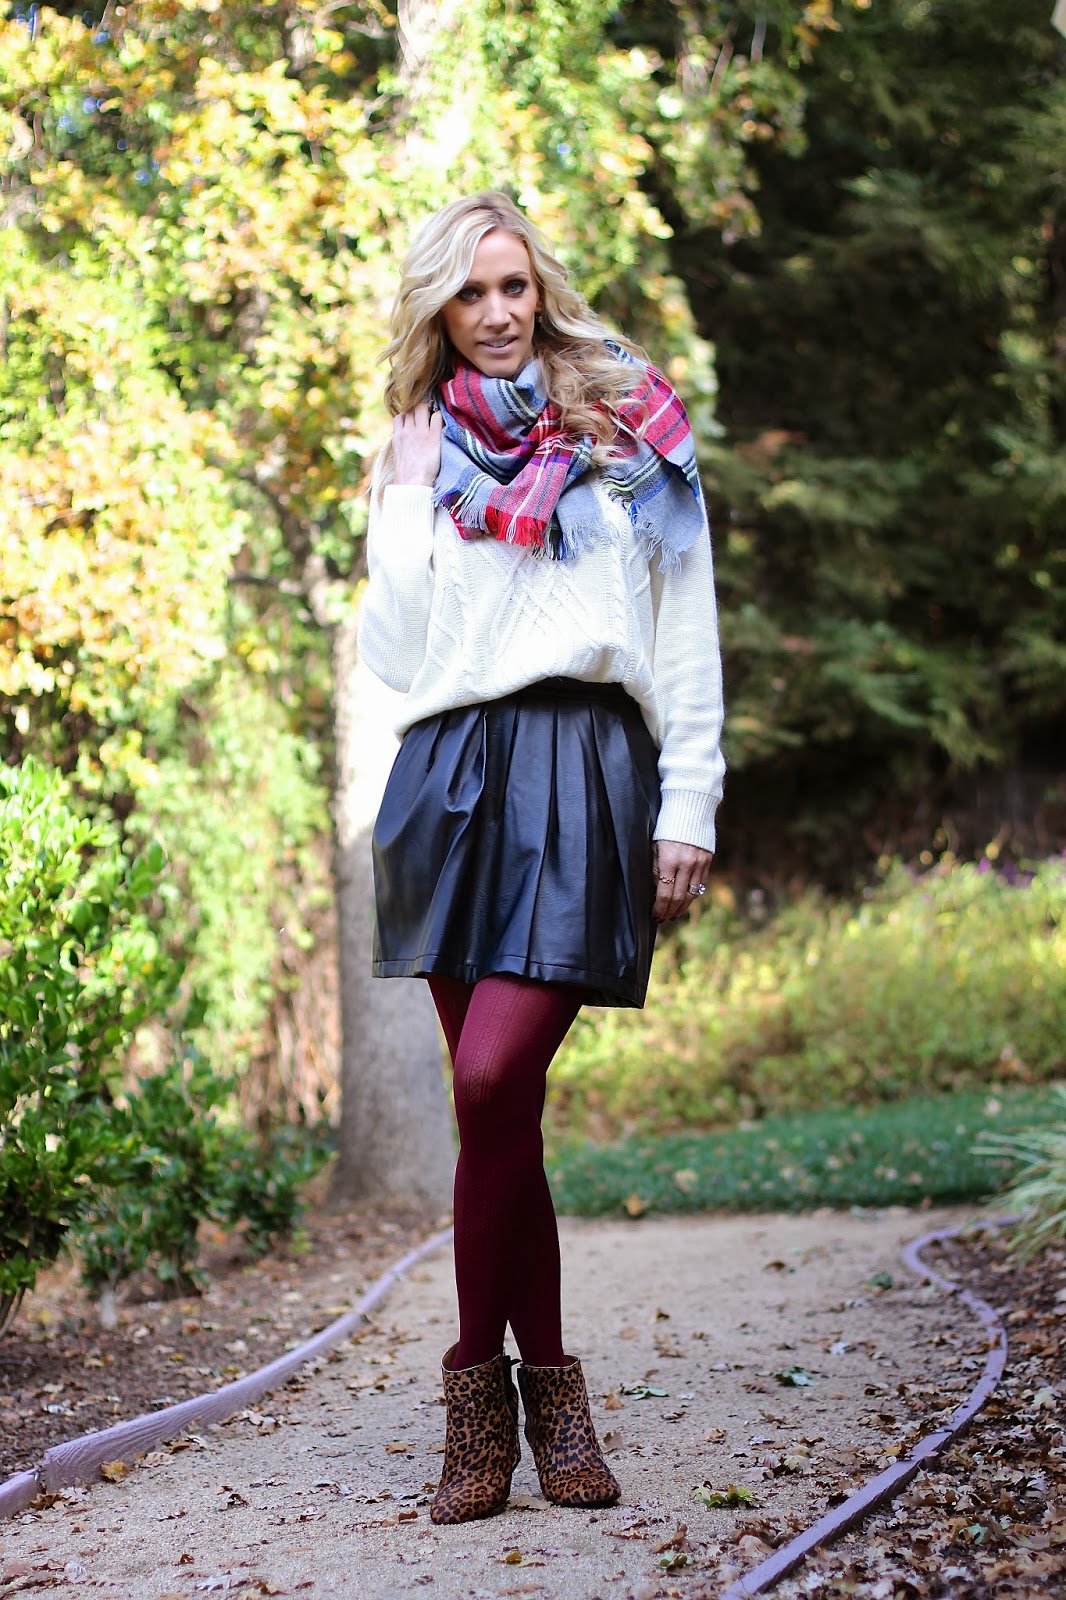 The Parlor Girl: 12 Days of Christmas Giveaway: Day 1 & Burgundy Tights